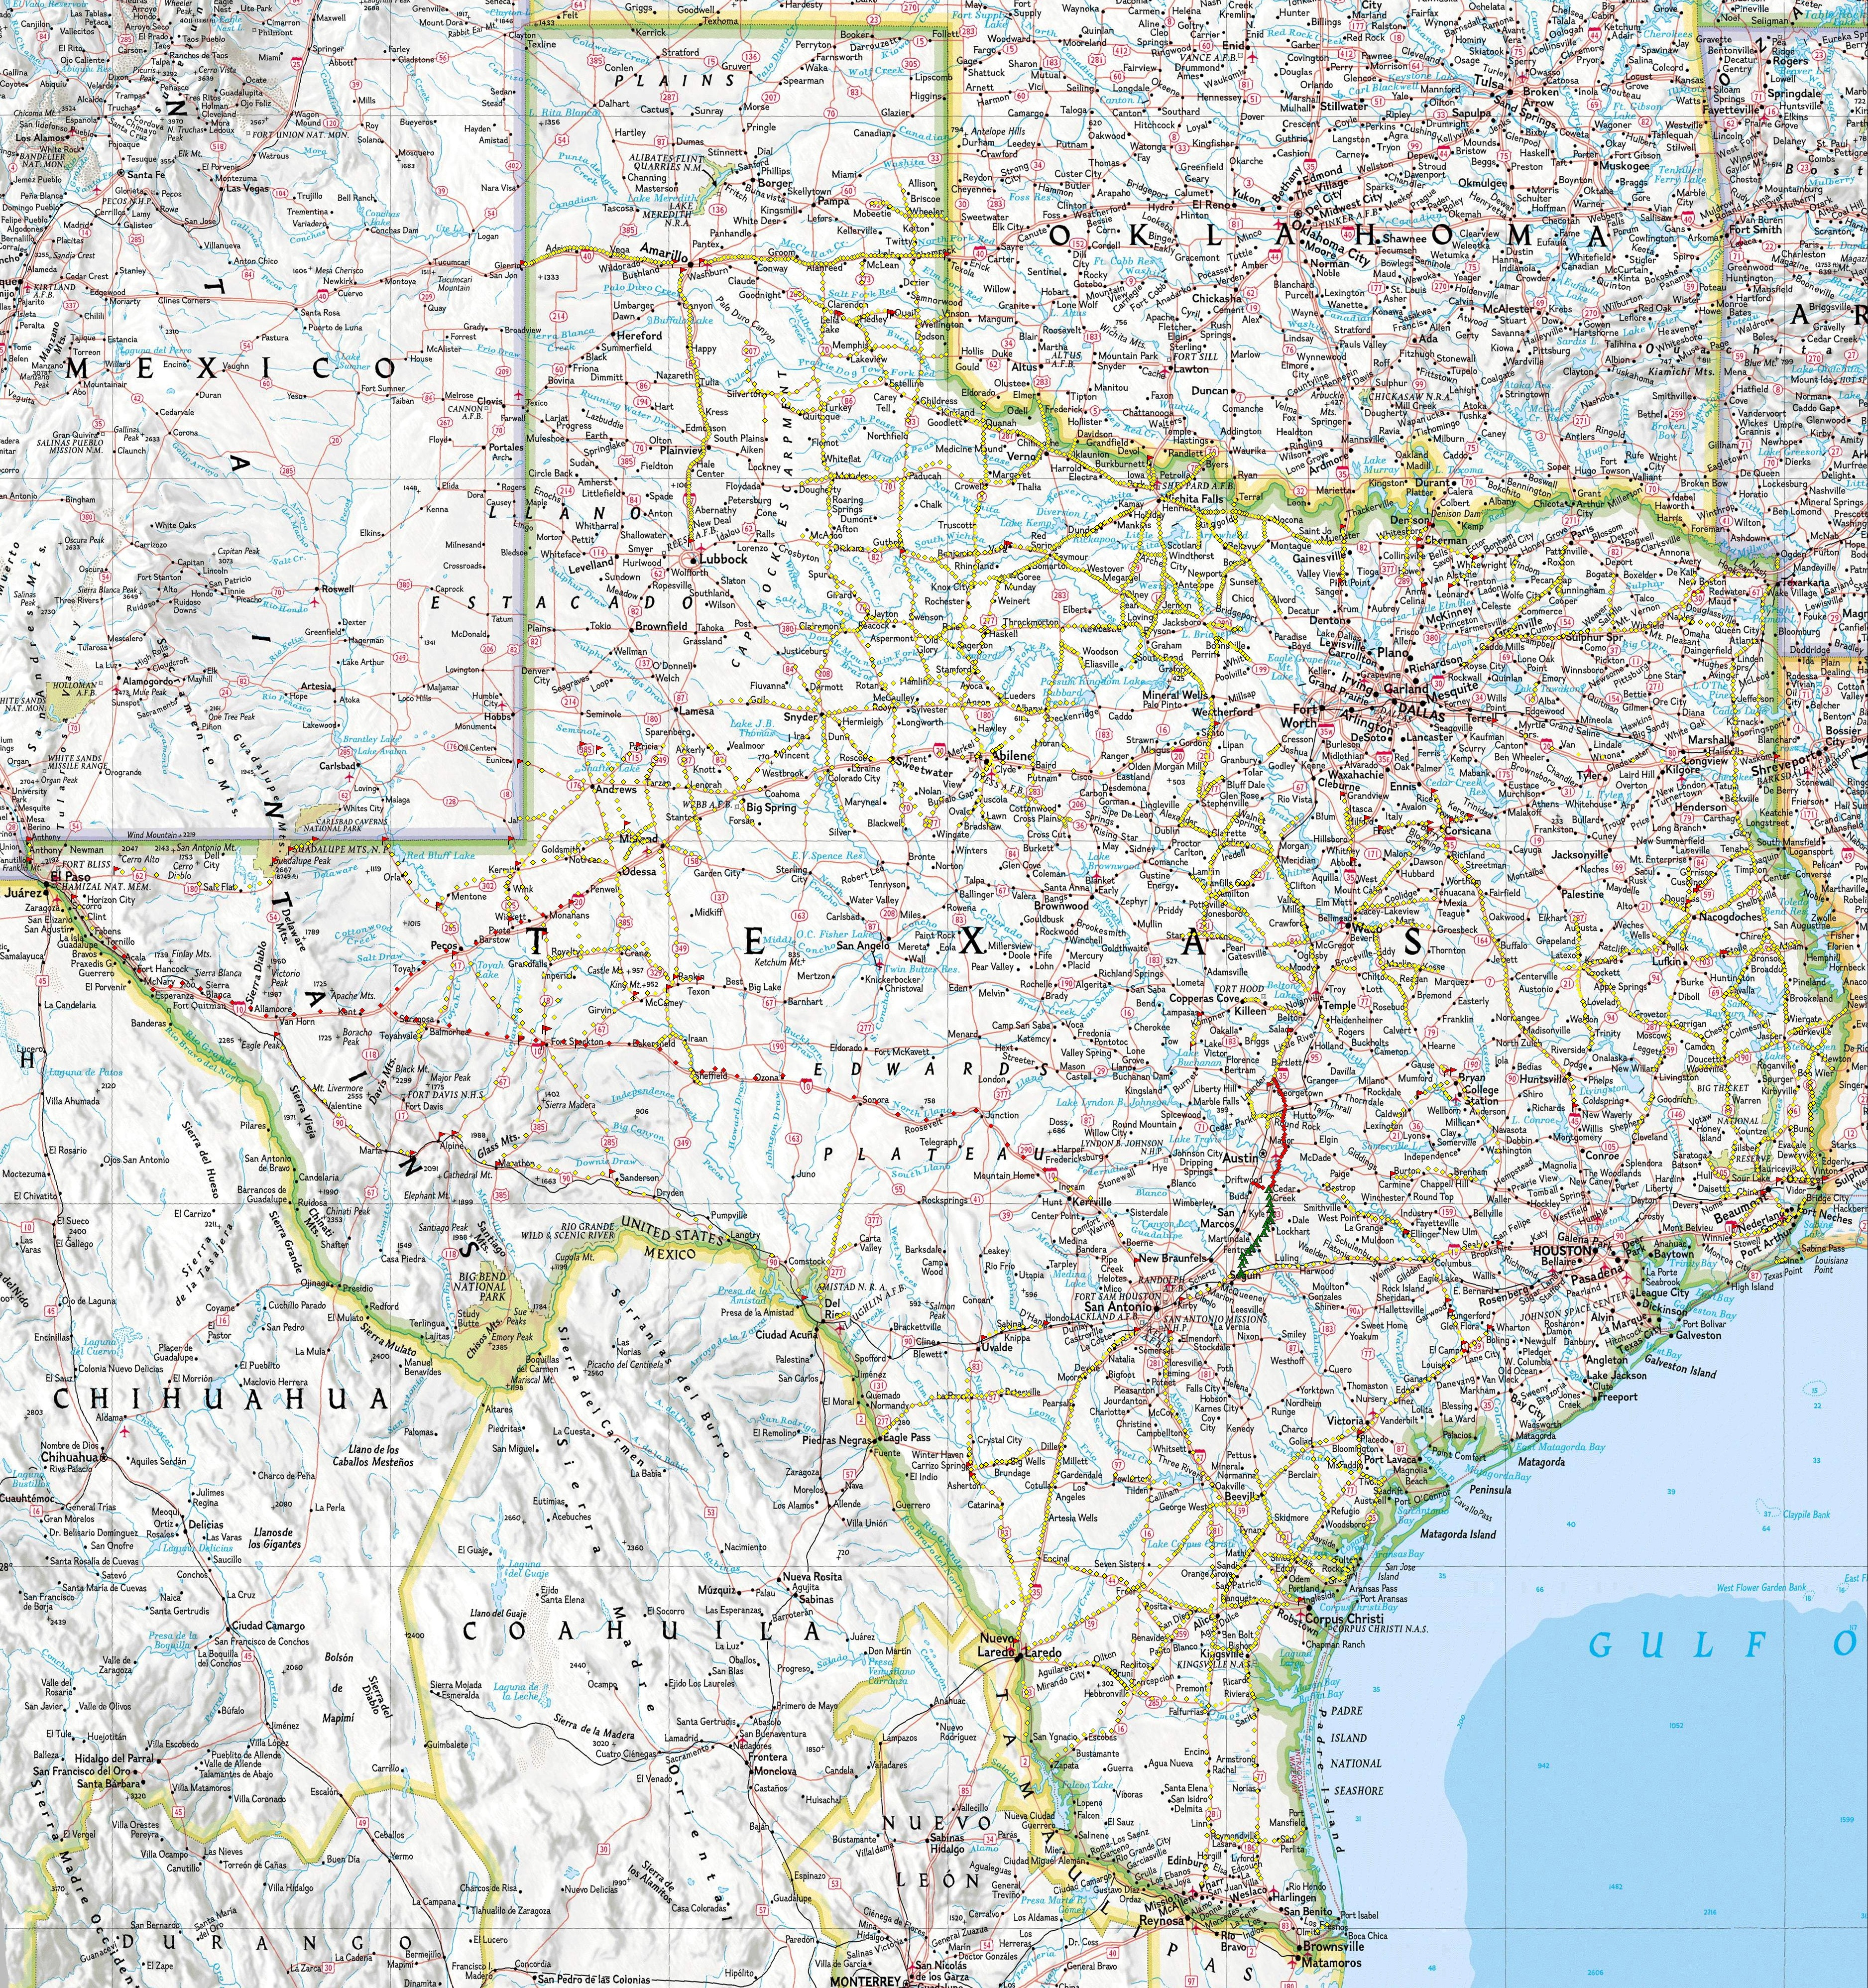 Texas Highway Speed Limit Map | Business Ideas 2013 - Texas Road Map 2017